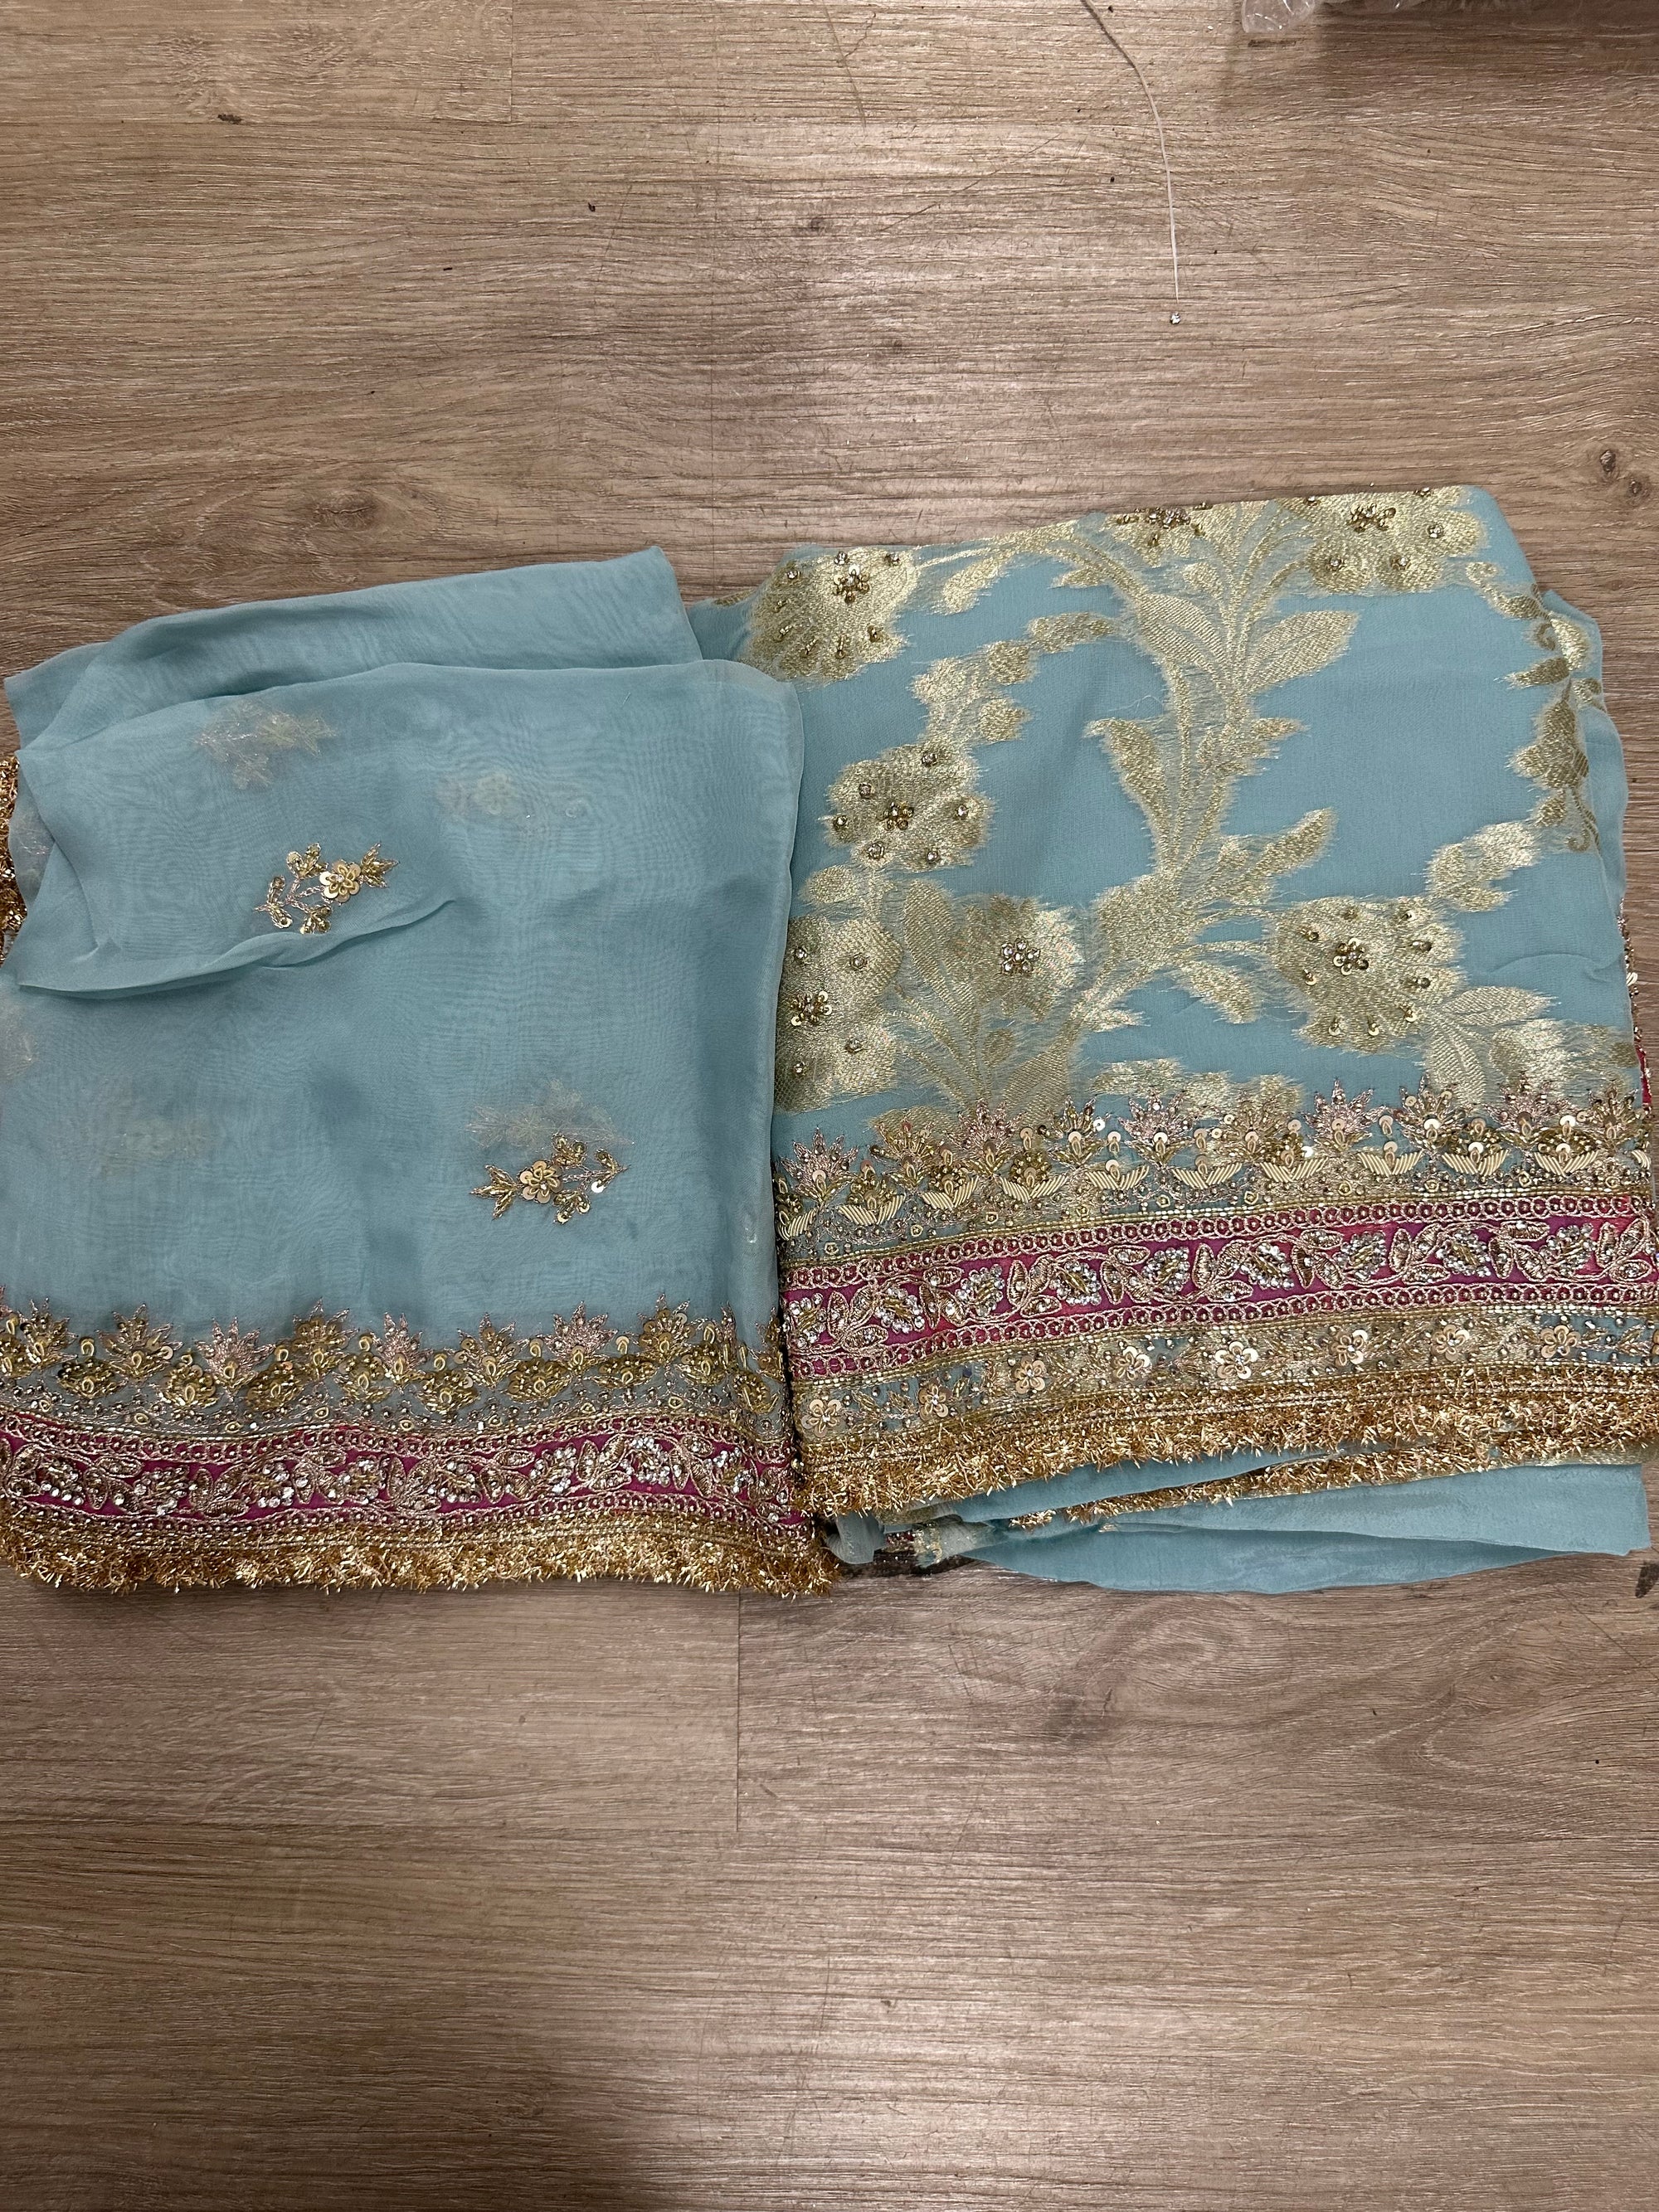 Unstitched Suits with Heavy Border embroidery